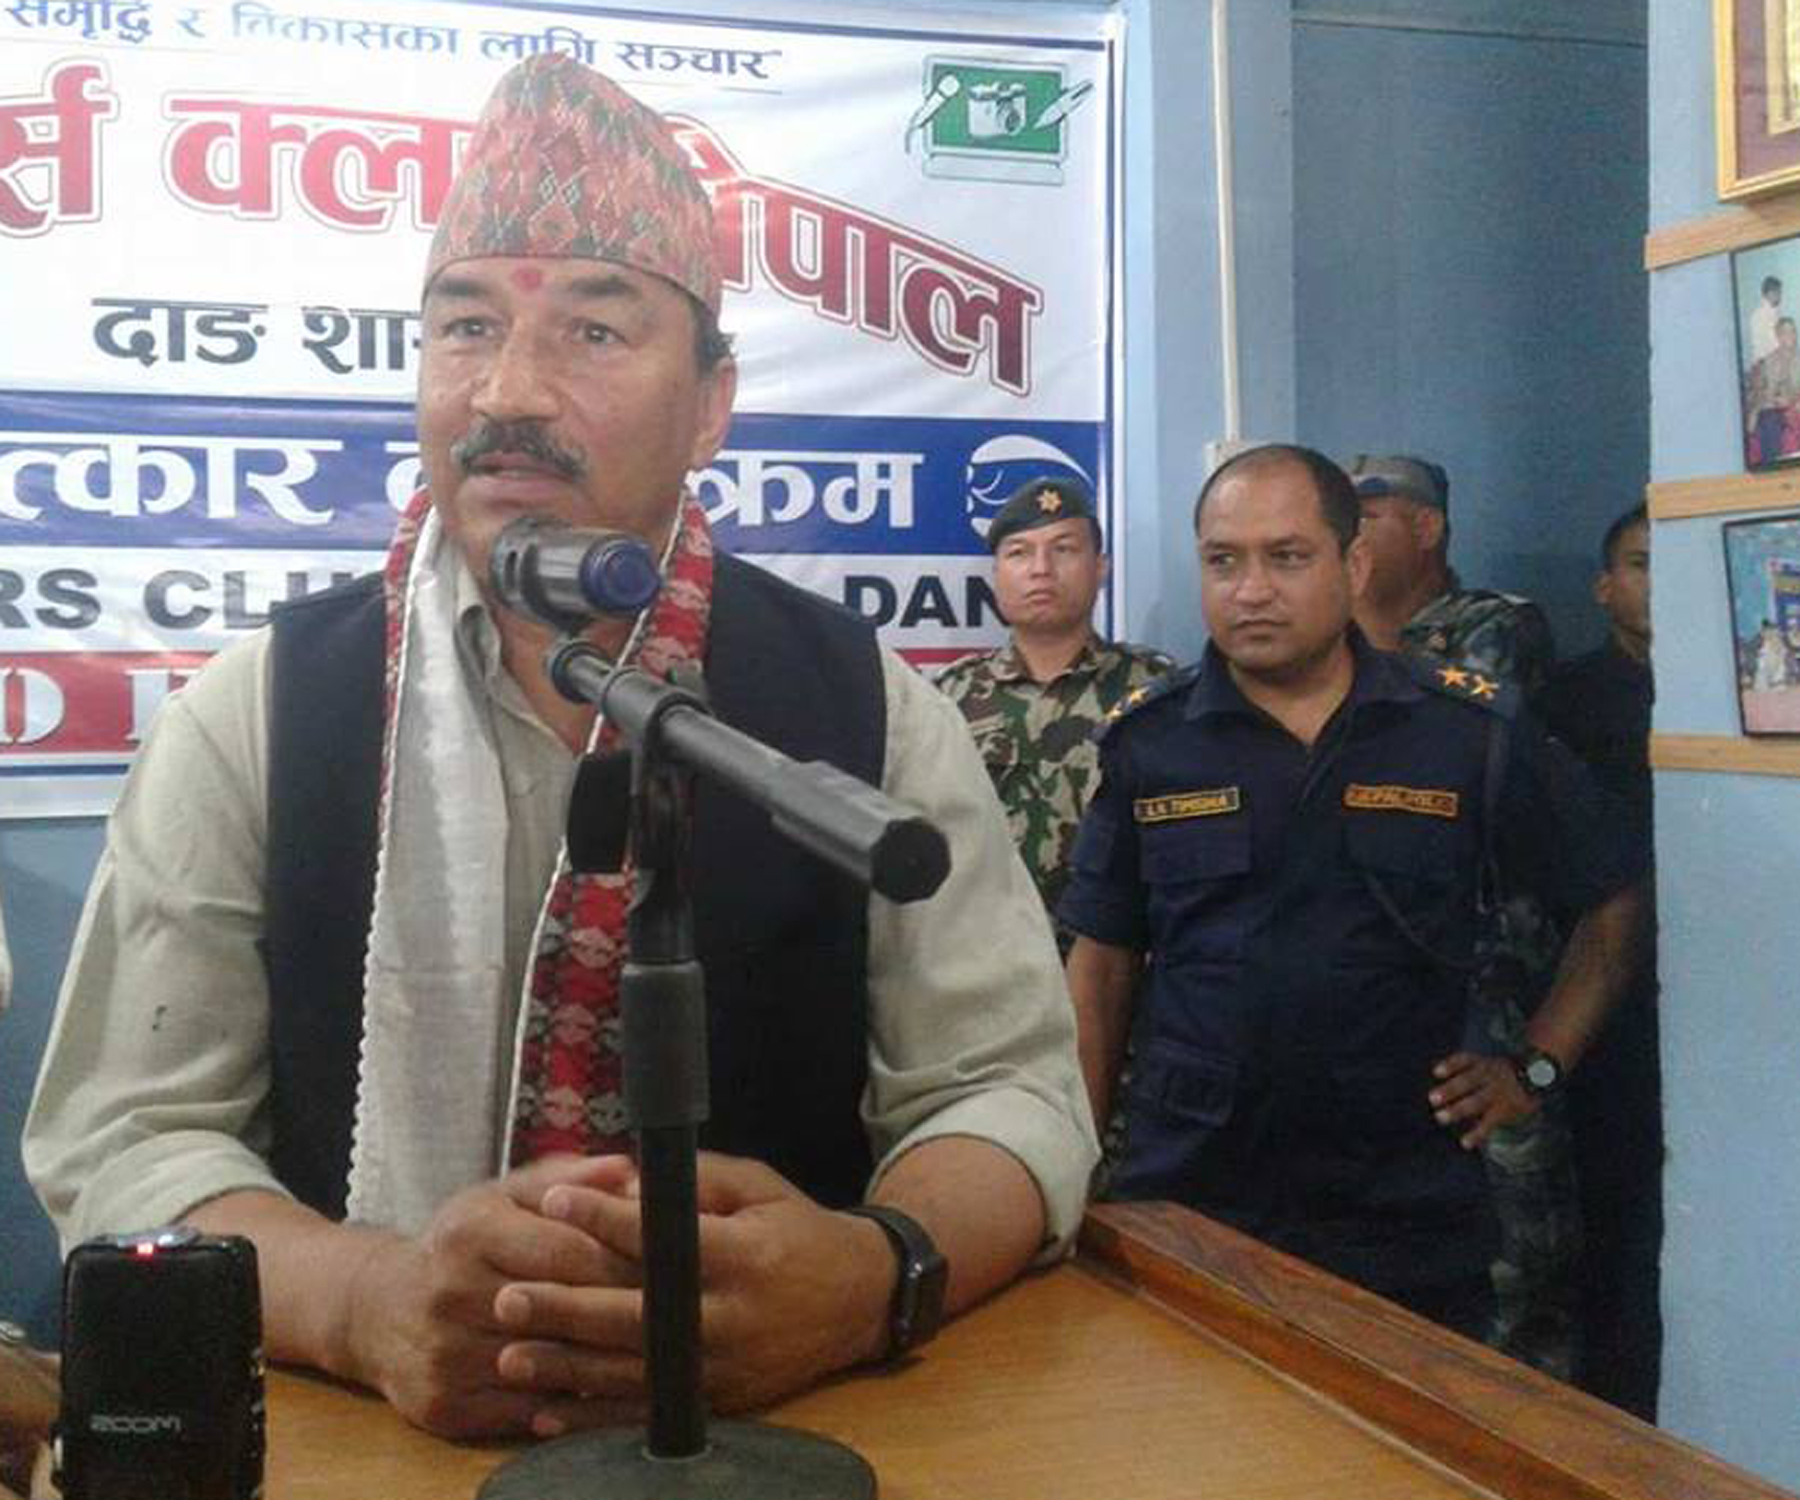 Local level elections at any cost, DPM Thapa says